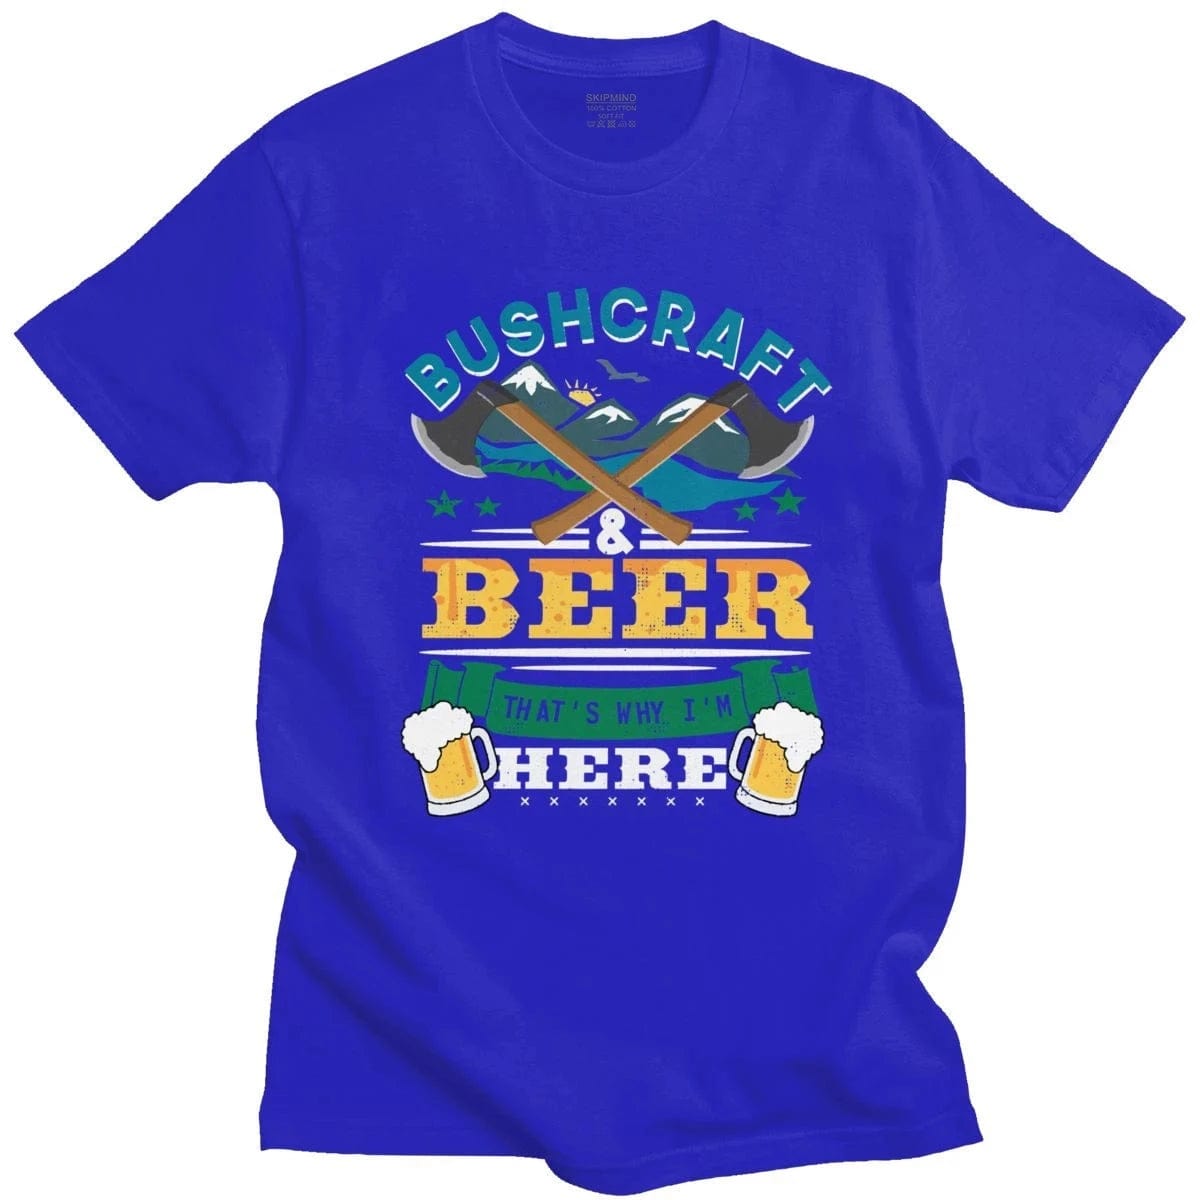 T-Shirt "Bushcraft & Beer That Is Why I Am Here" Blau / XS prepper-store.com